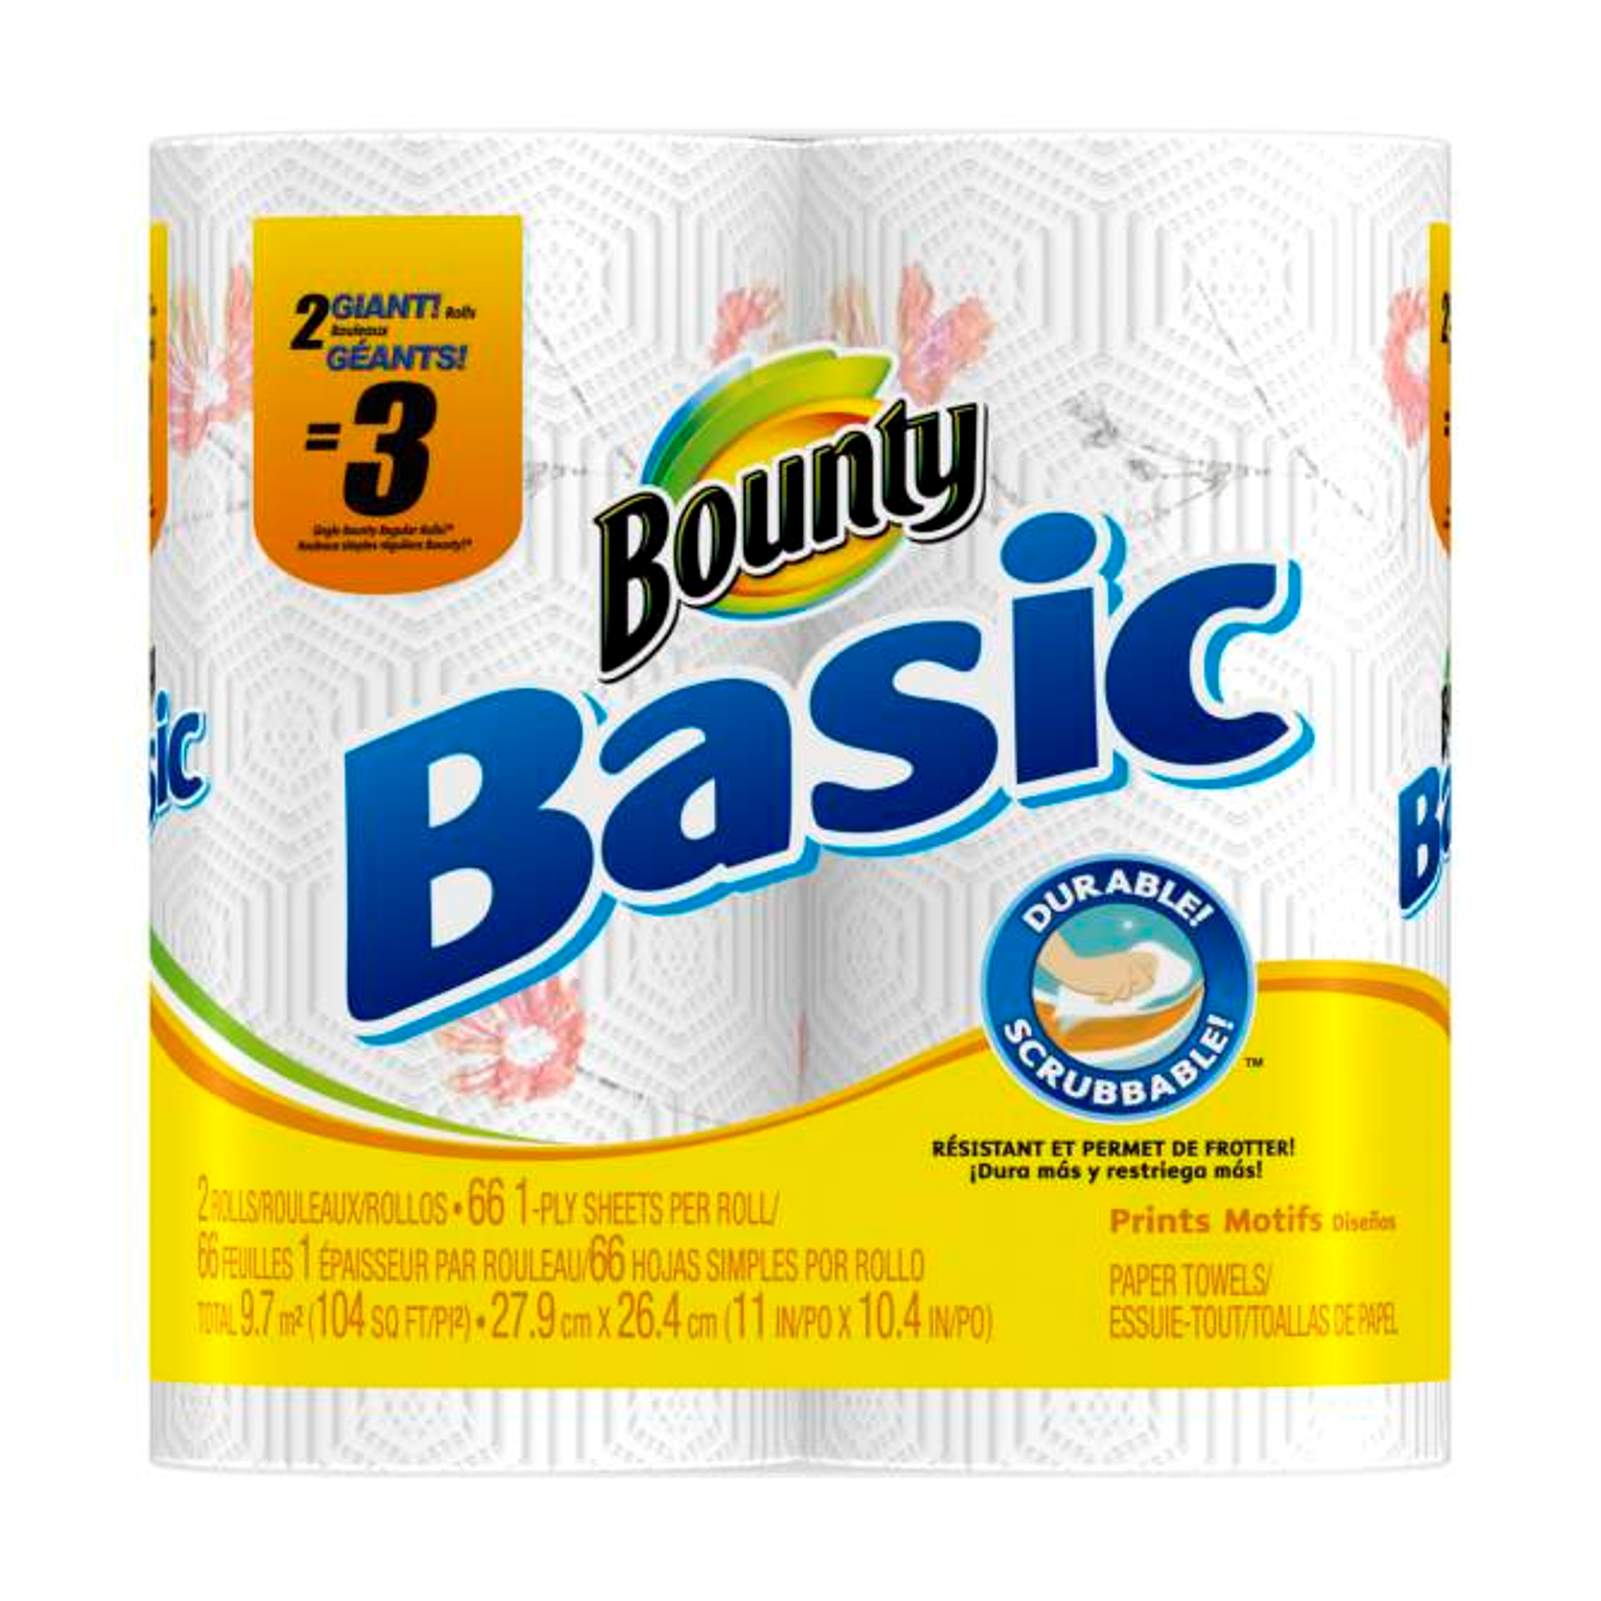 Bounty Basic Paper Towels 2 Giant Rolls With Prints